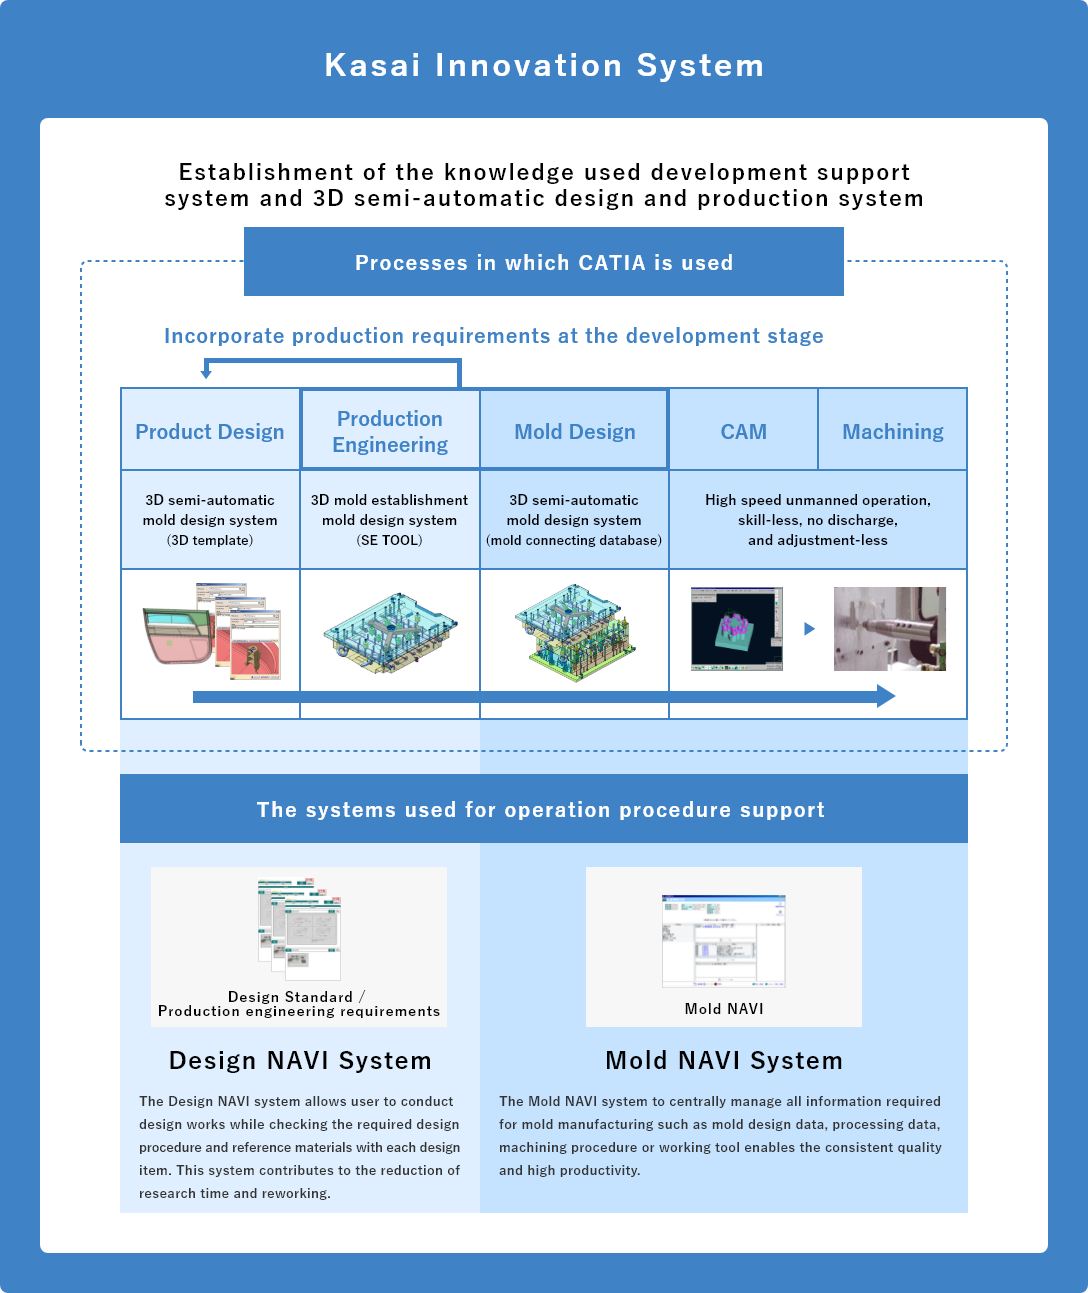 Kasai Innovation System Establishment of the knowledge used development support system and 3D semi-automatic design and production system